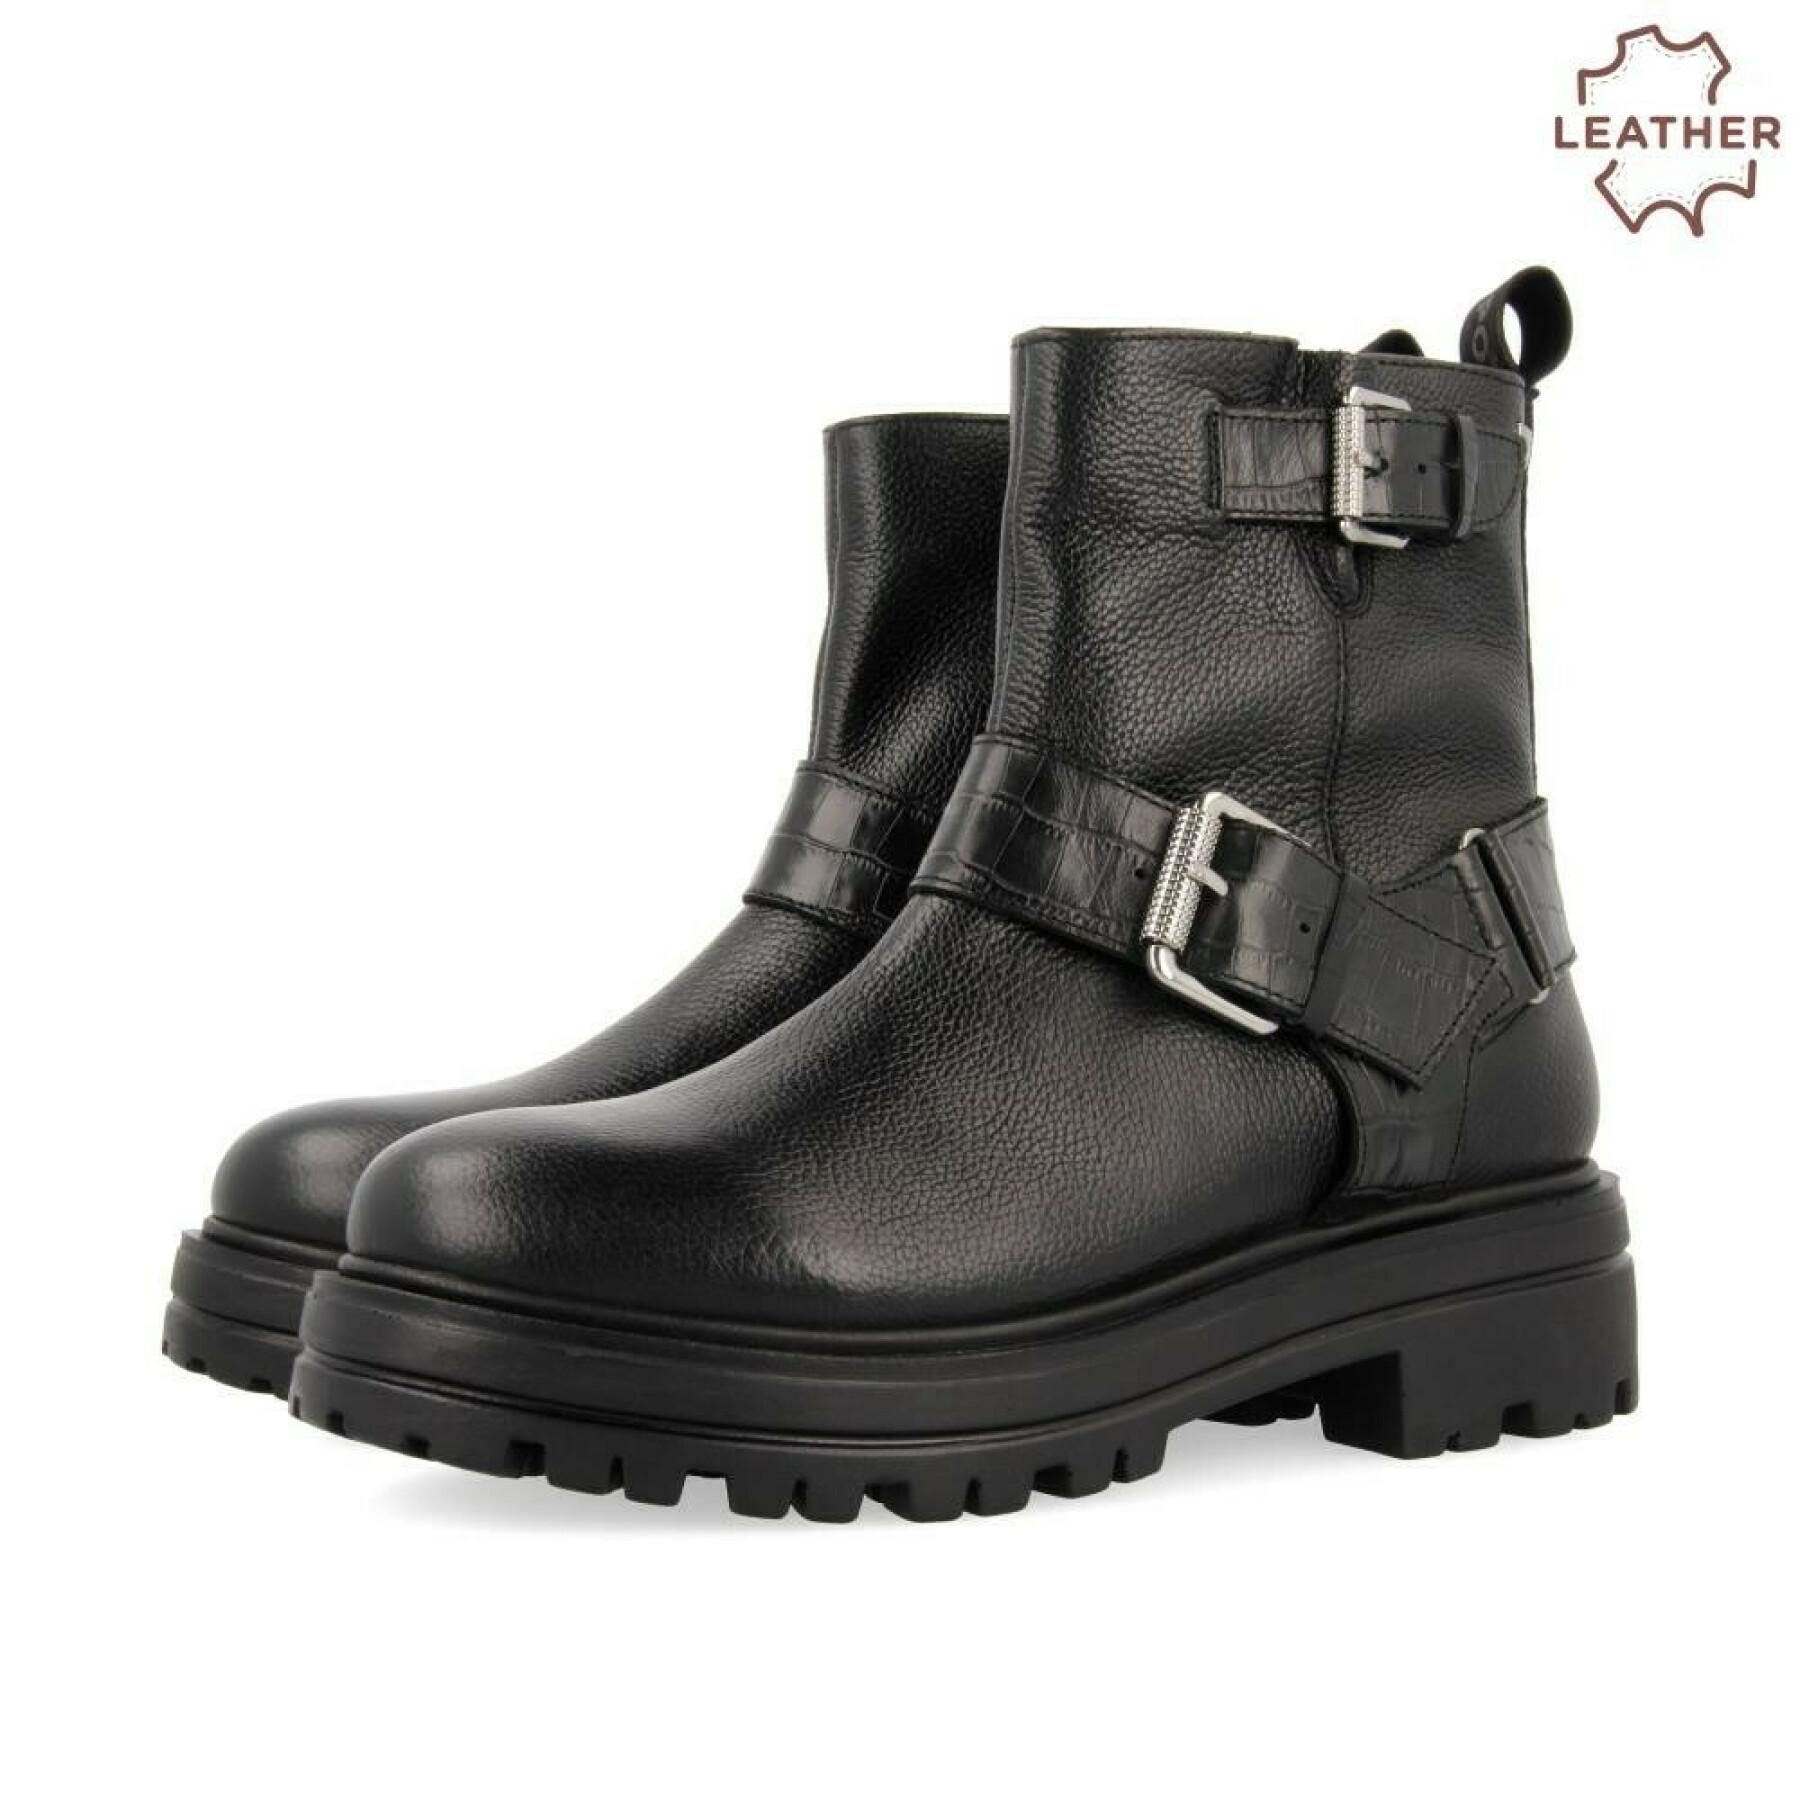 Women's boots Gioseppo Enschede